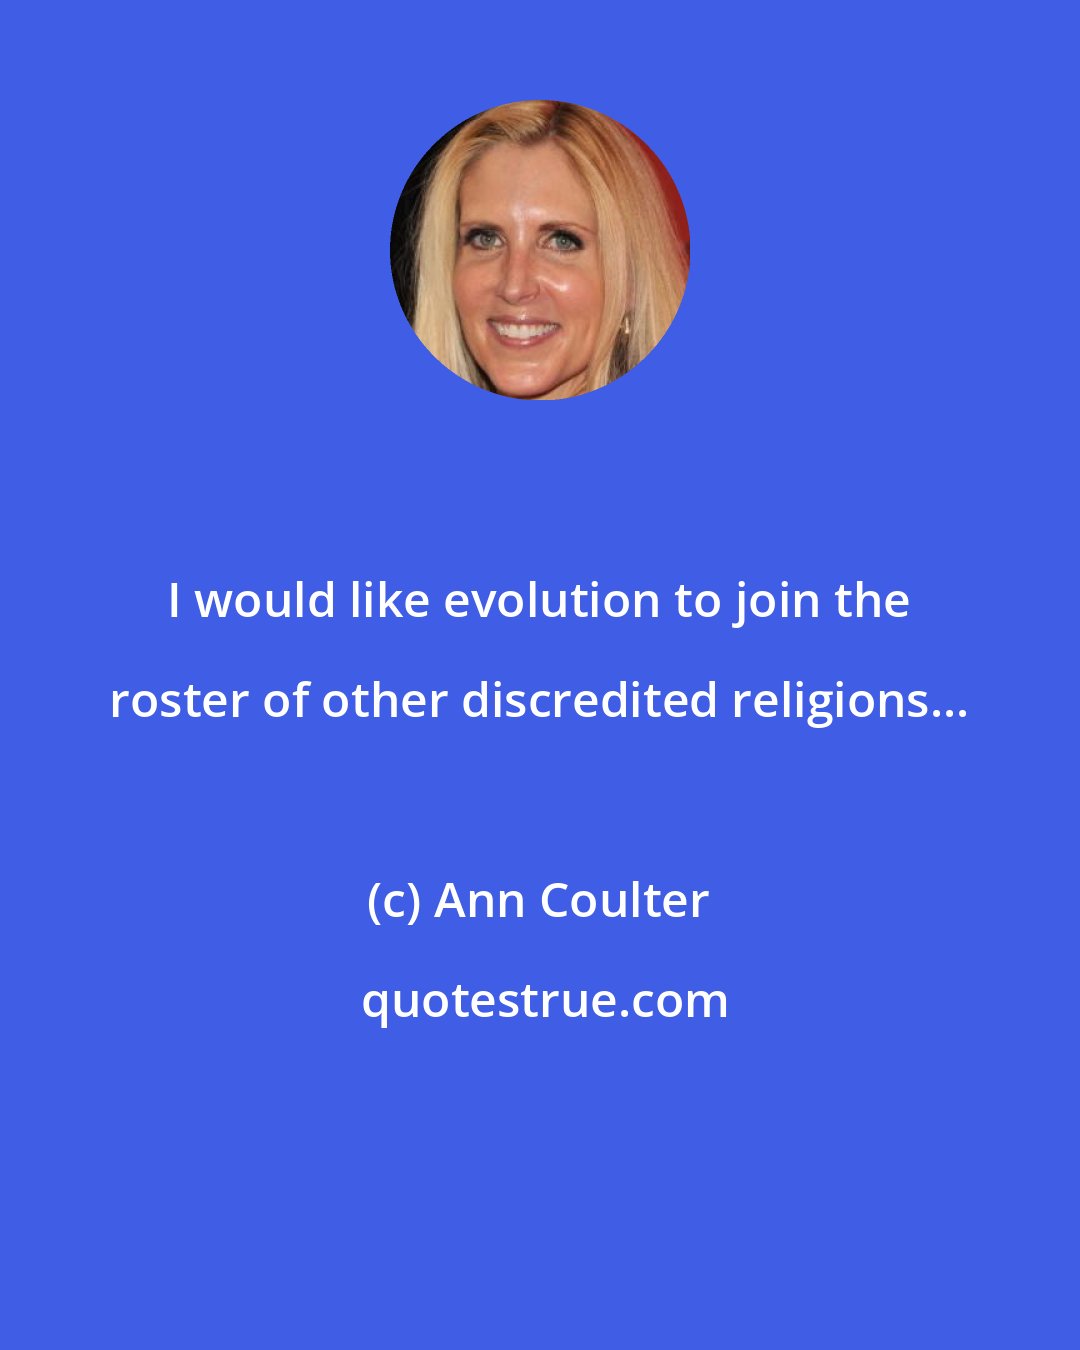 Ann Coulter: I would like evolution to join the roster of other discredited religions...